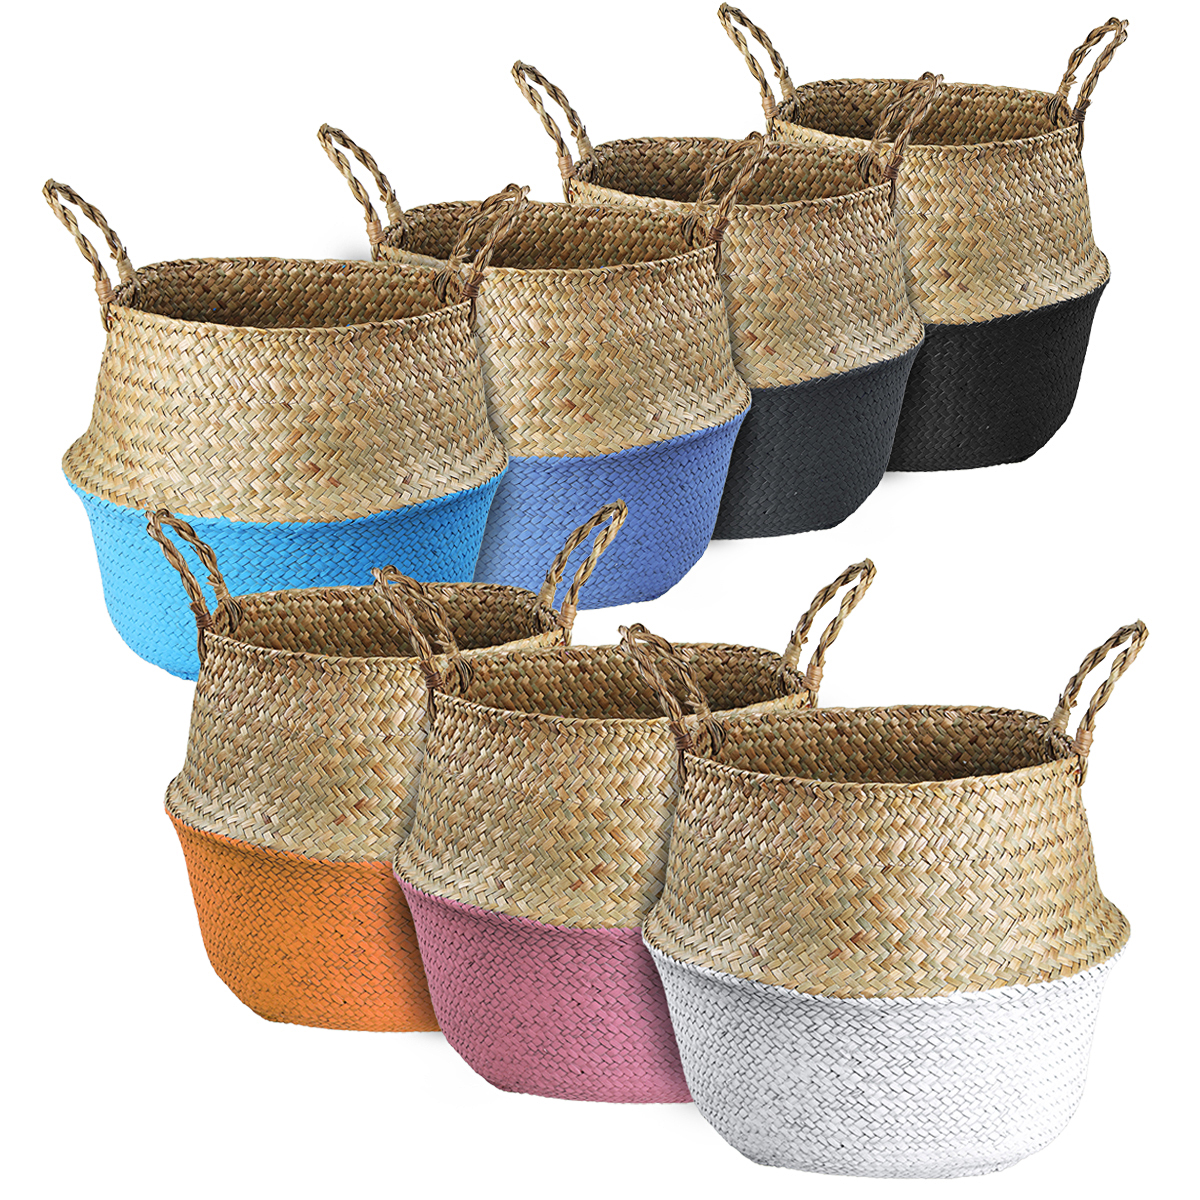 Woven-Flower-Basket-Foldable-Bamboo-Storage-Toy-Dirty-Clothes-Basket-Home-House-Supplies-1733912-3